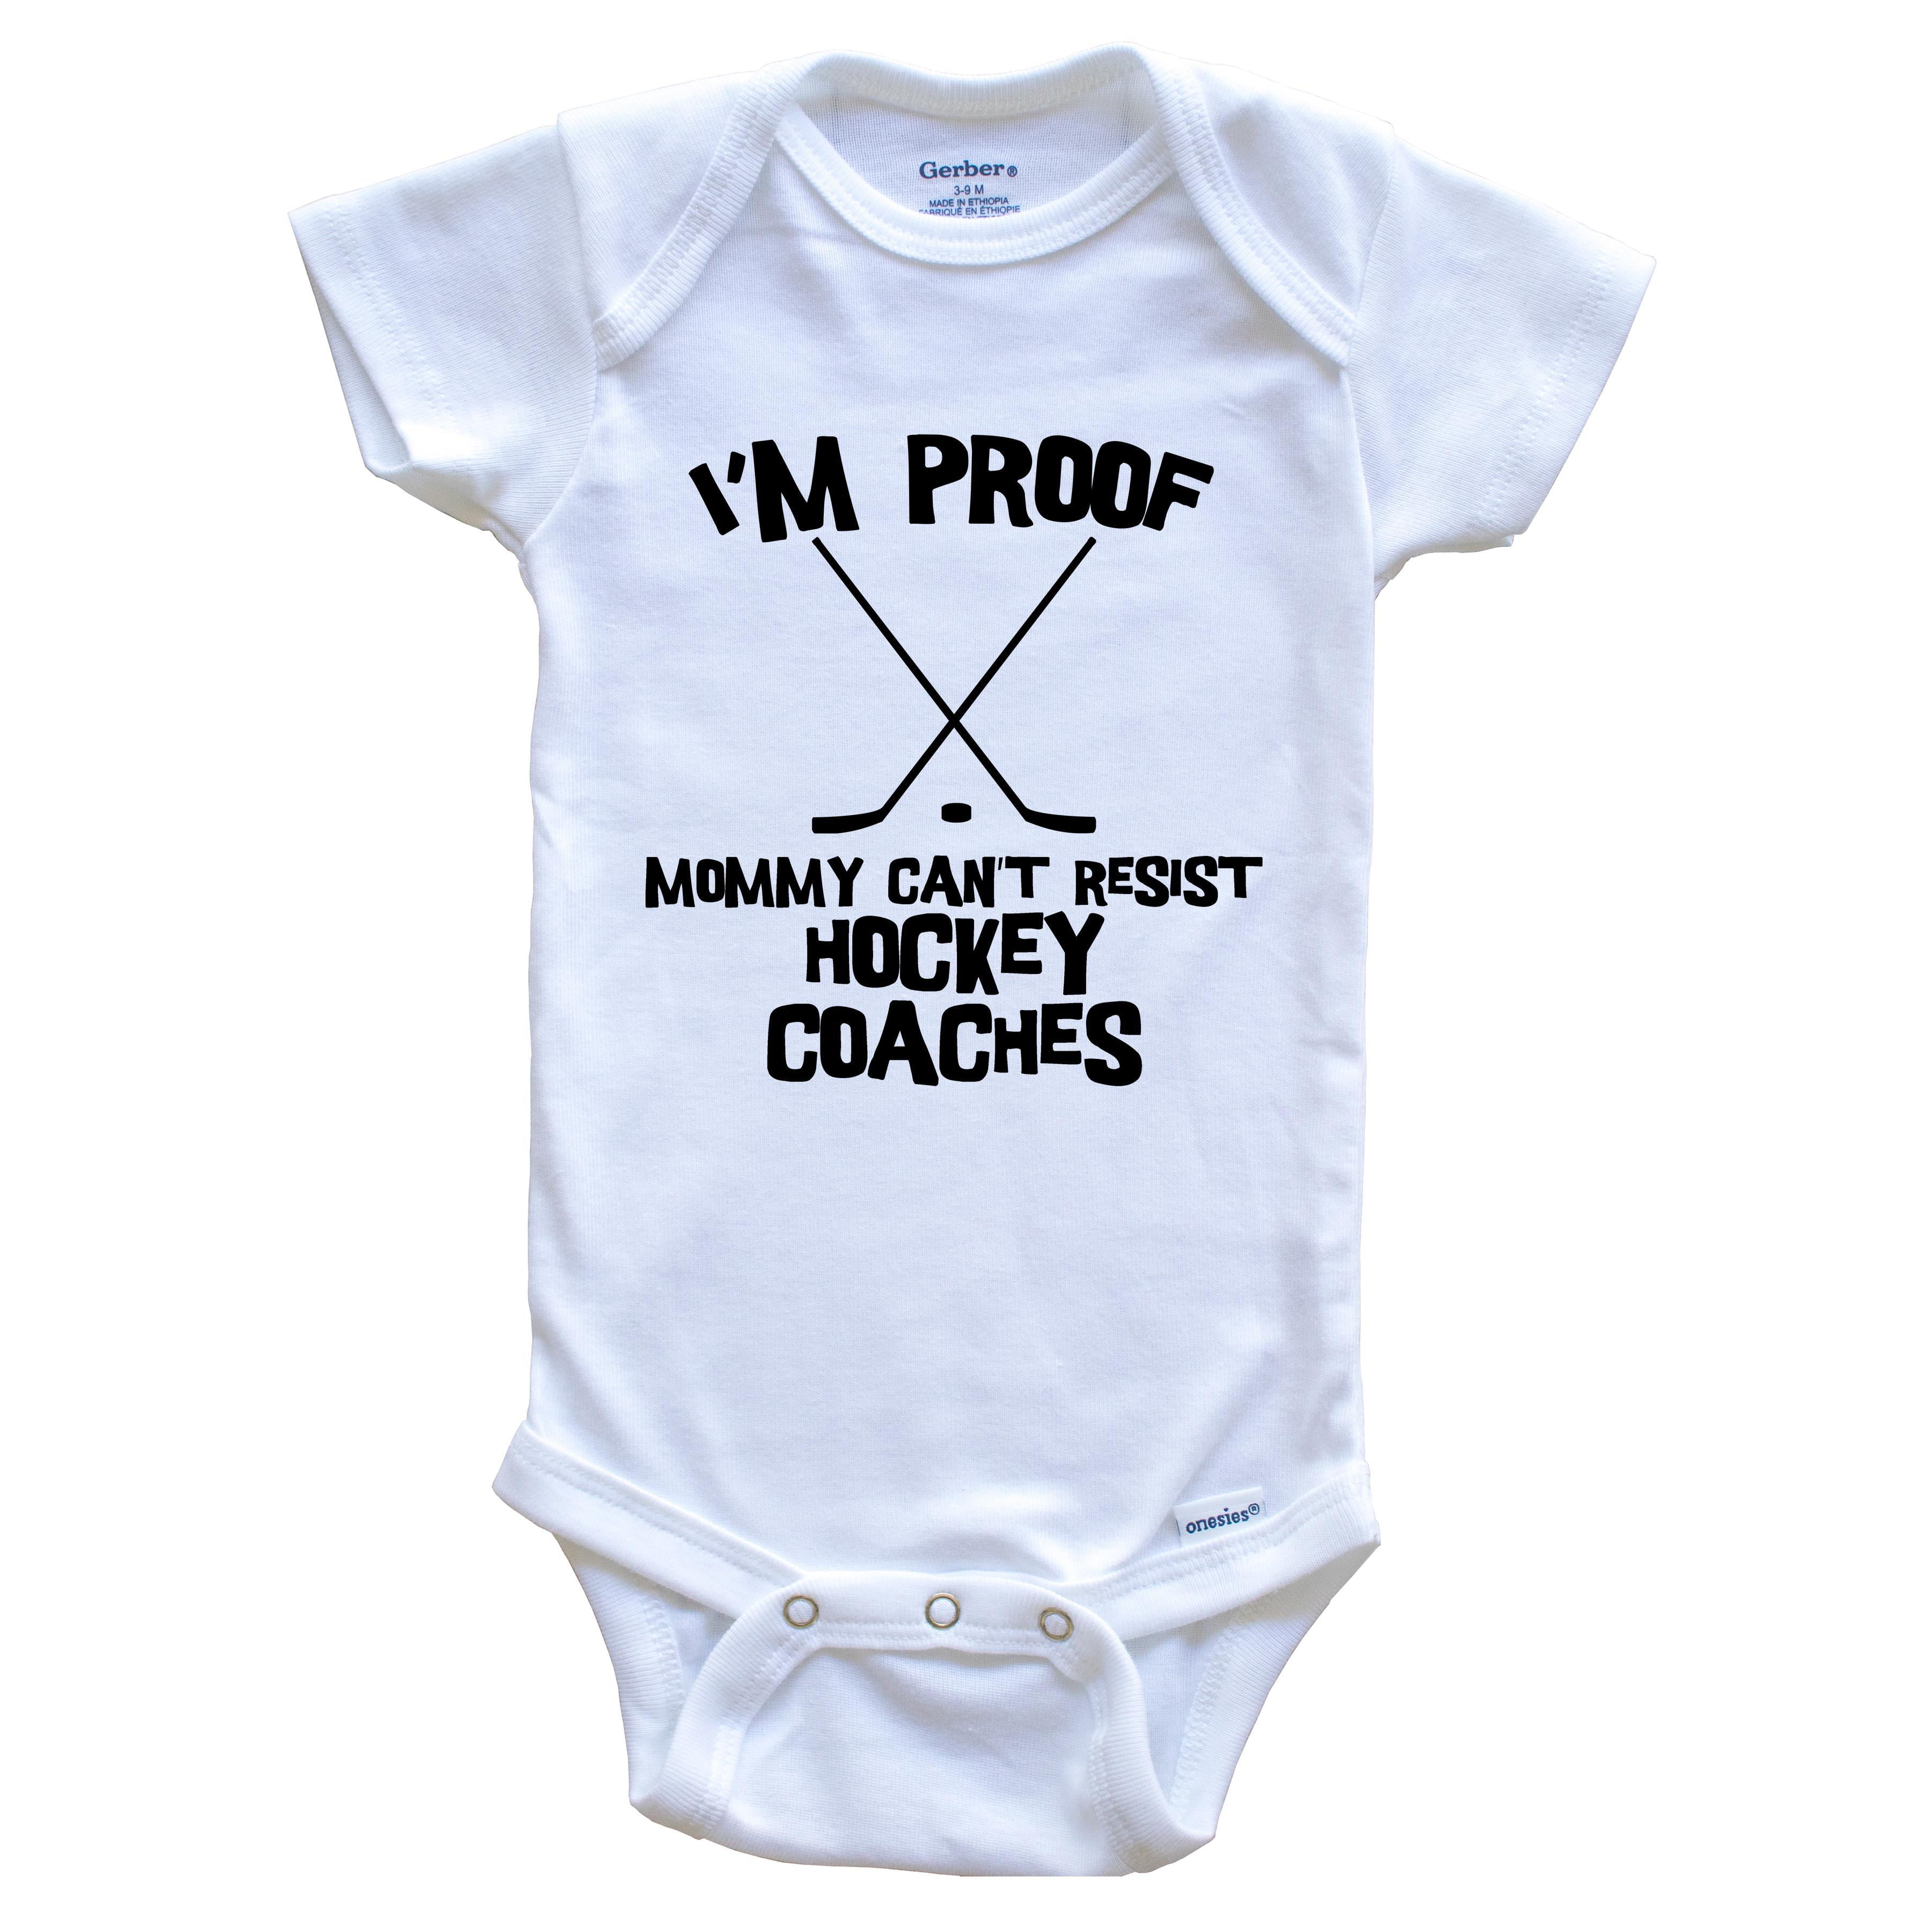 Proof Daddy Doesnt Play Soccer All The Time Unisex Baby Infant Romper Newborn 